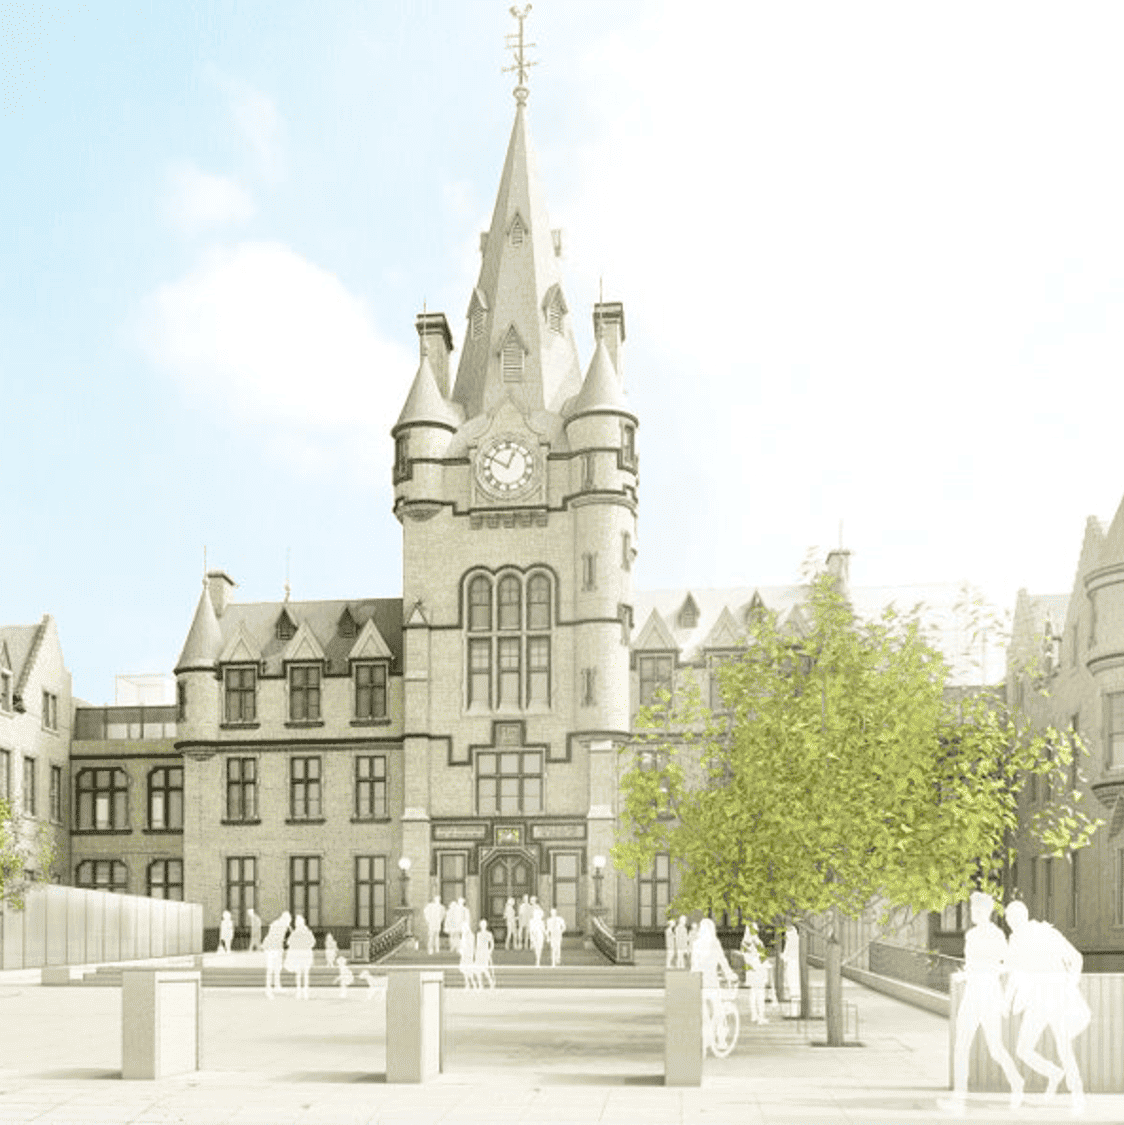 Artist's Impression of the front facade on the new Edinburgh Futures Institute building.